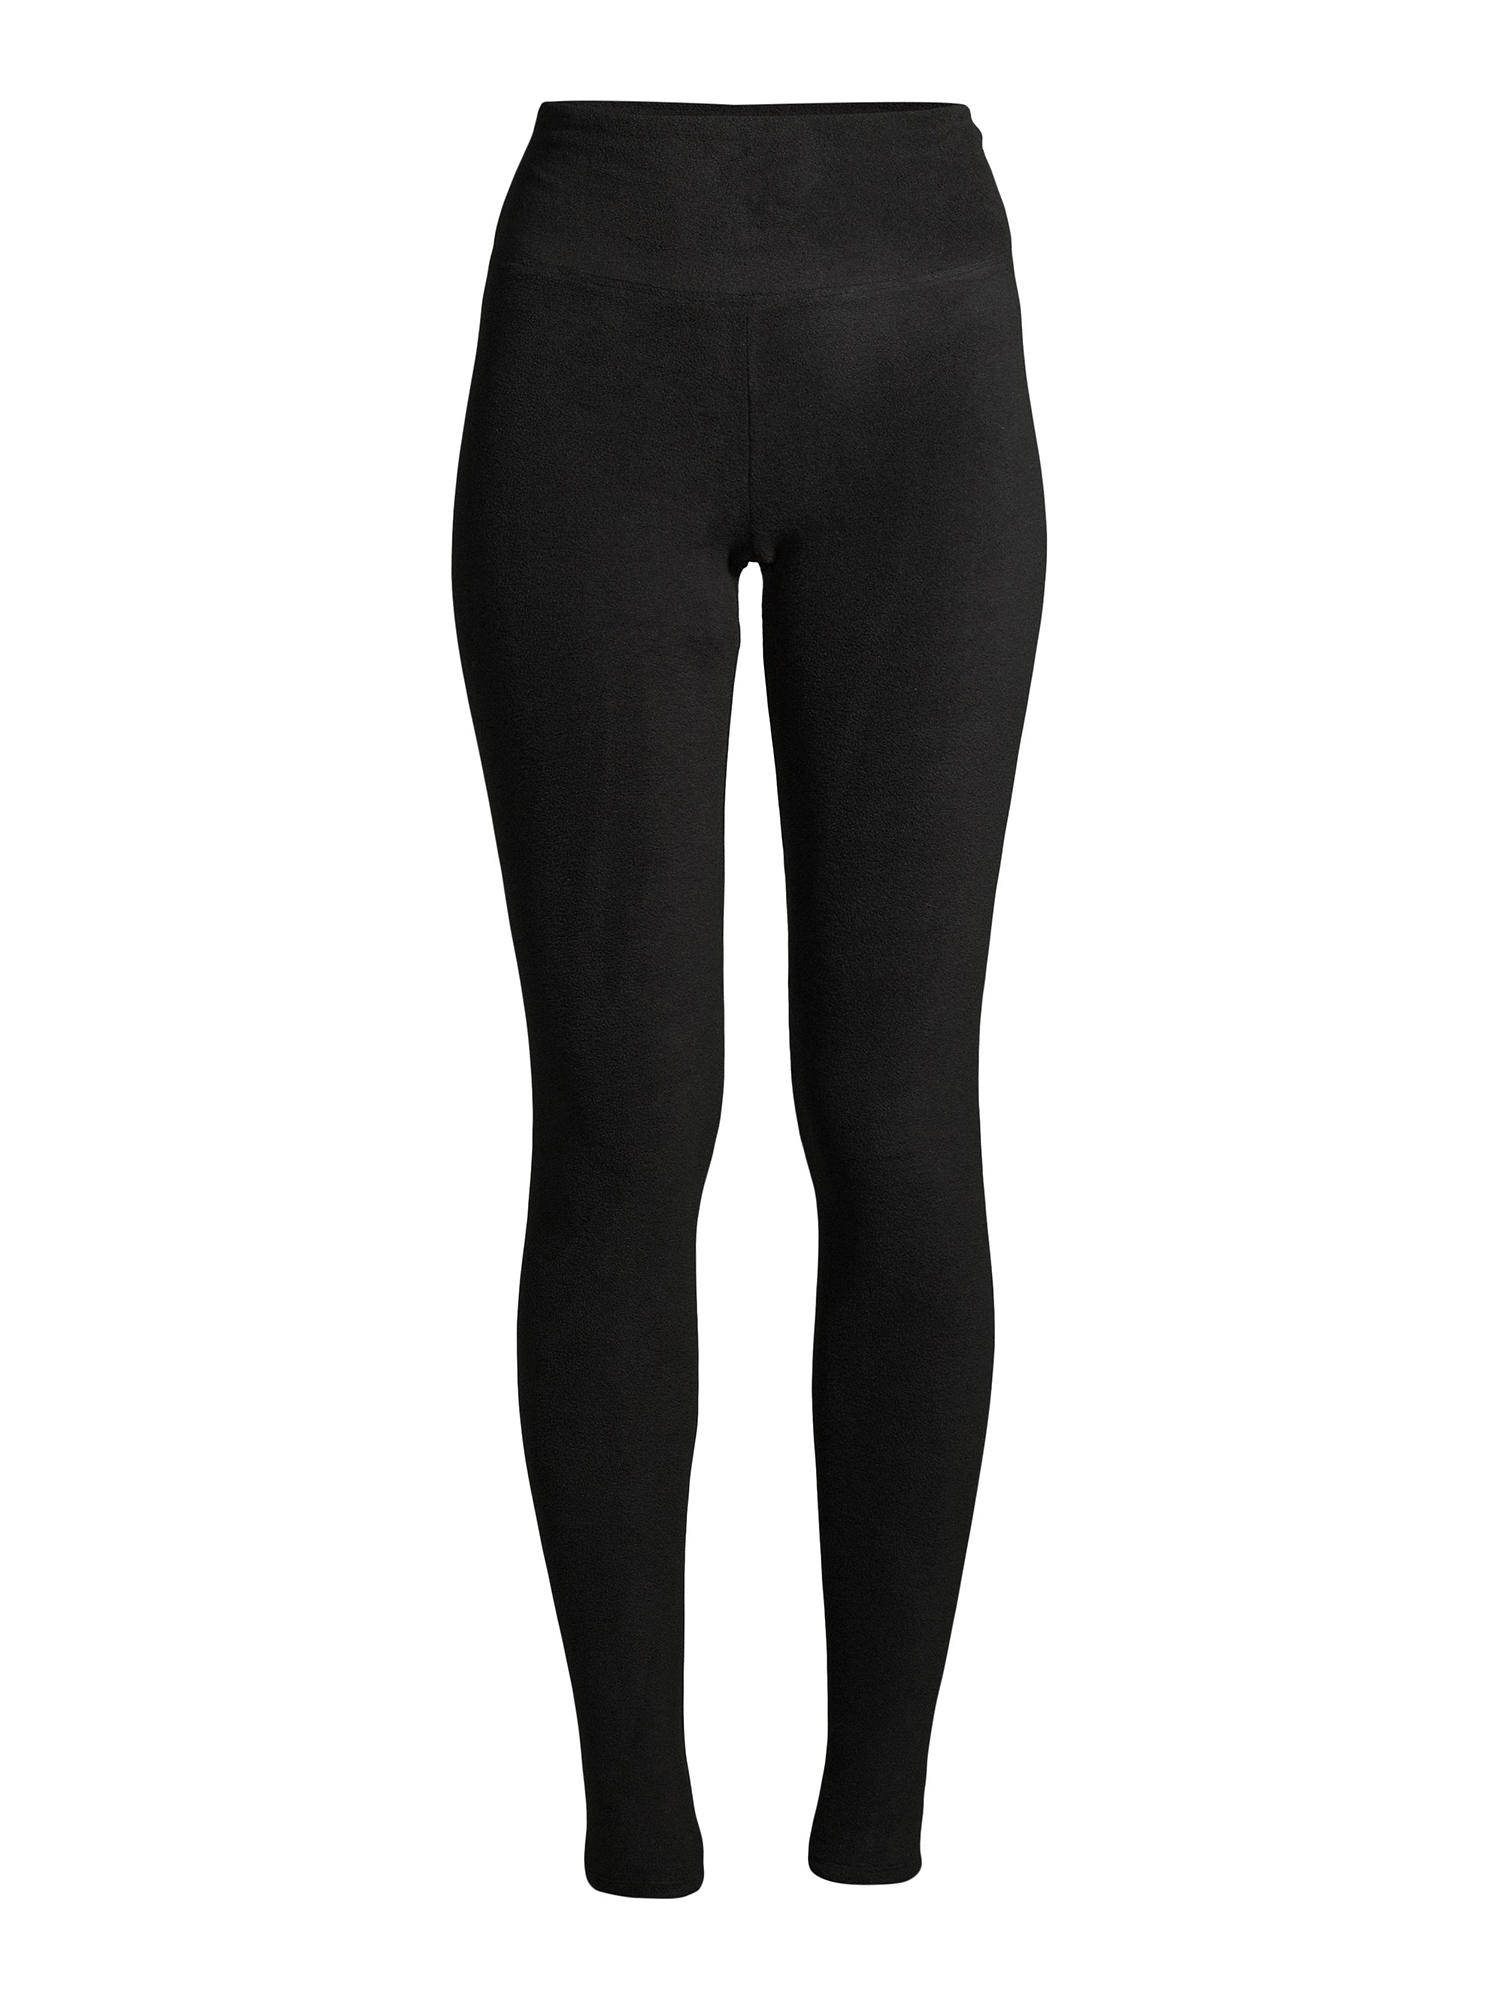 ClimateRight by Cuddl Duds Women's Stretch Fleece Base Layer High Waisted Thermal Leggings - image 3 of 6